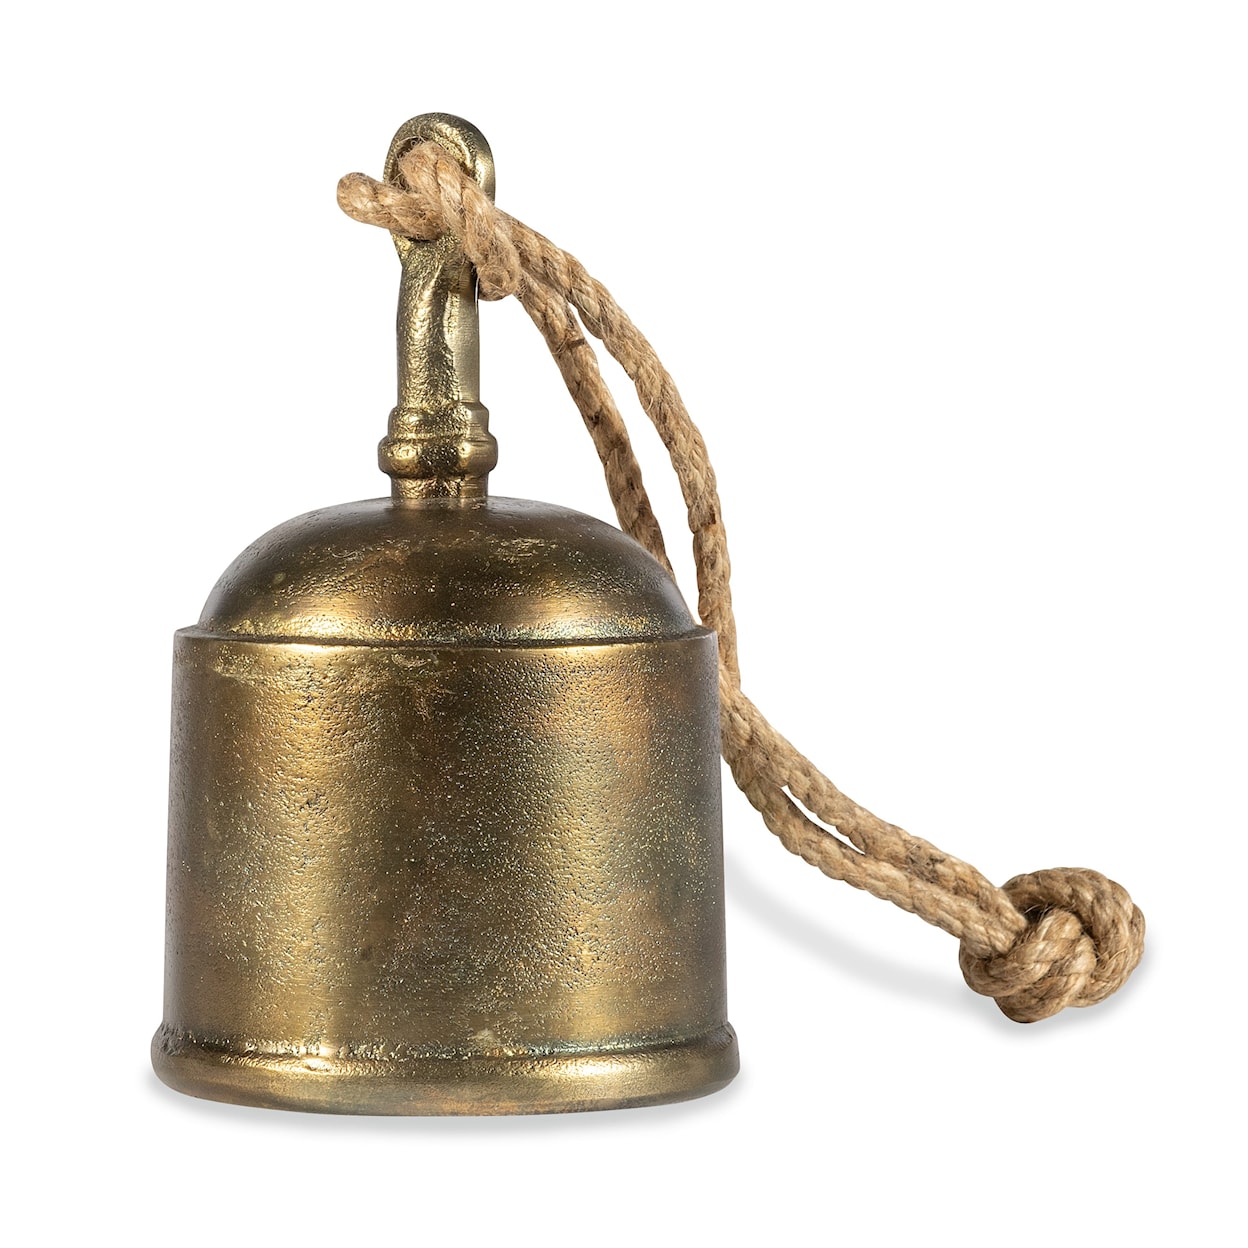 BOBO Intriguing Objects BOBO Intriguing Objects Antique Brass Bell - Large